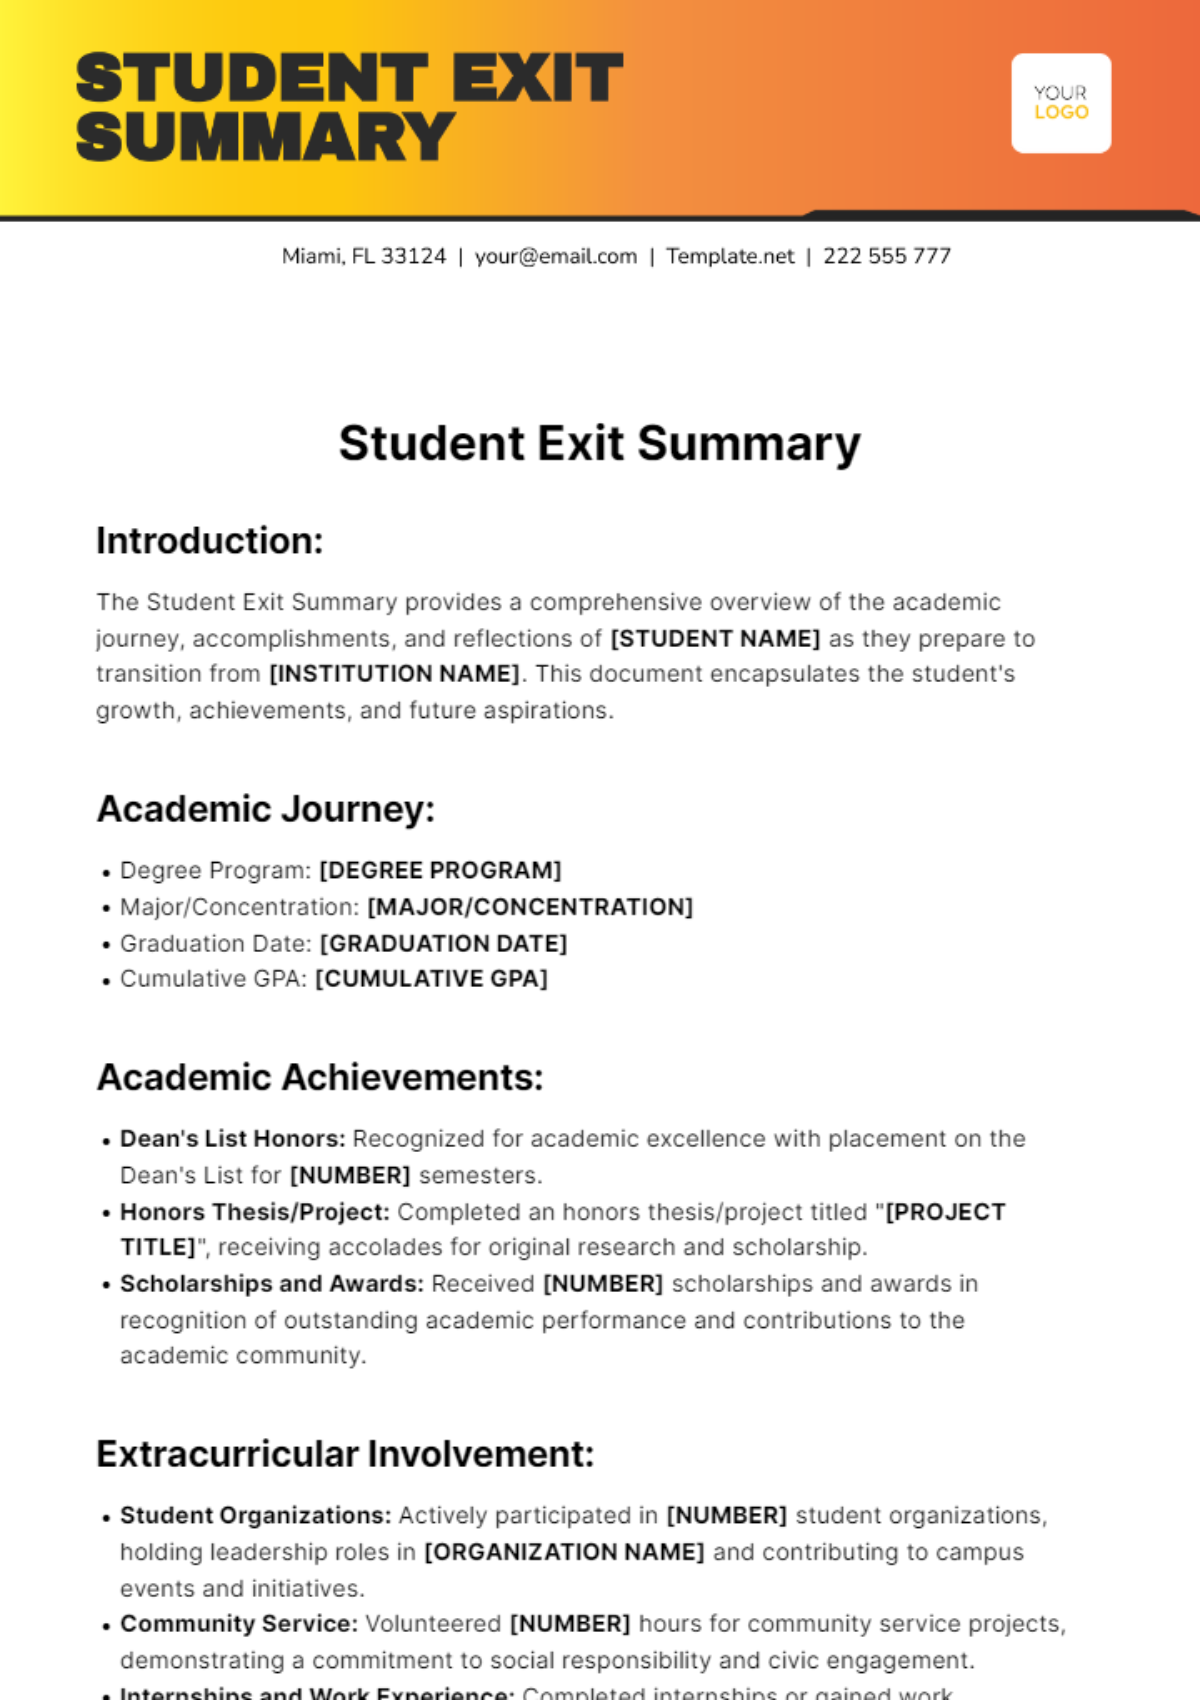 Student Exit Summary Template